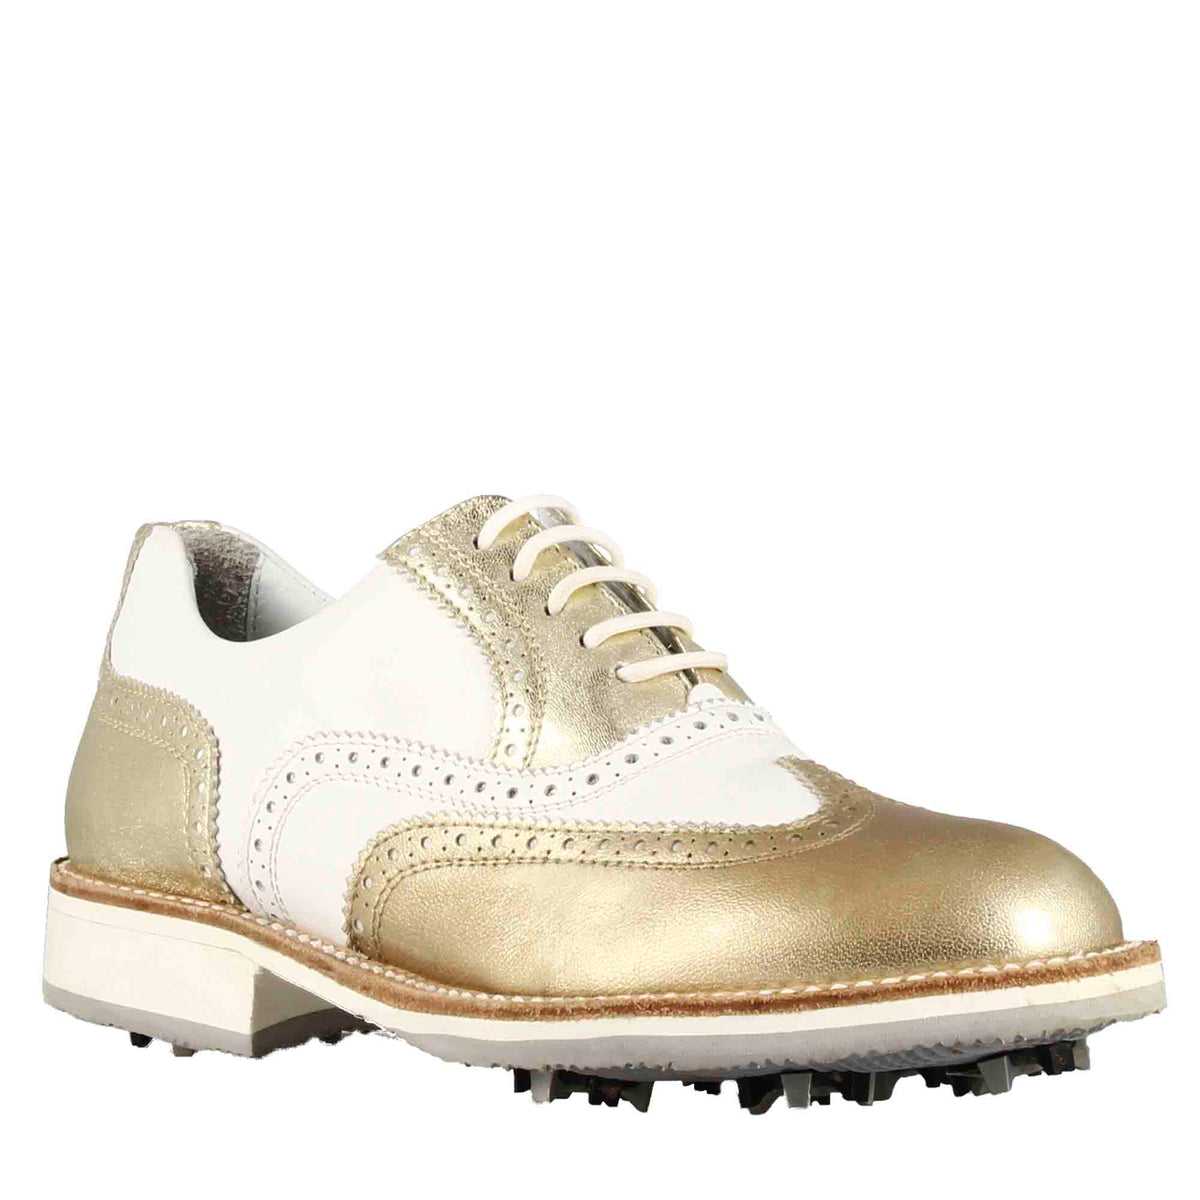 Handcrafted man's golf shoes in white leather with gold-colored details